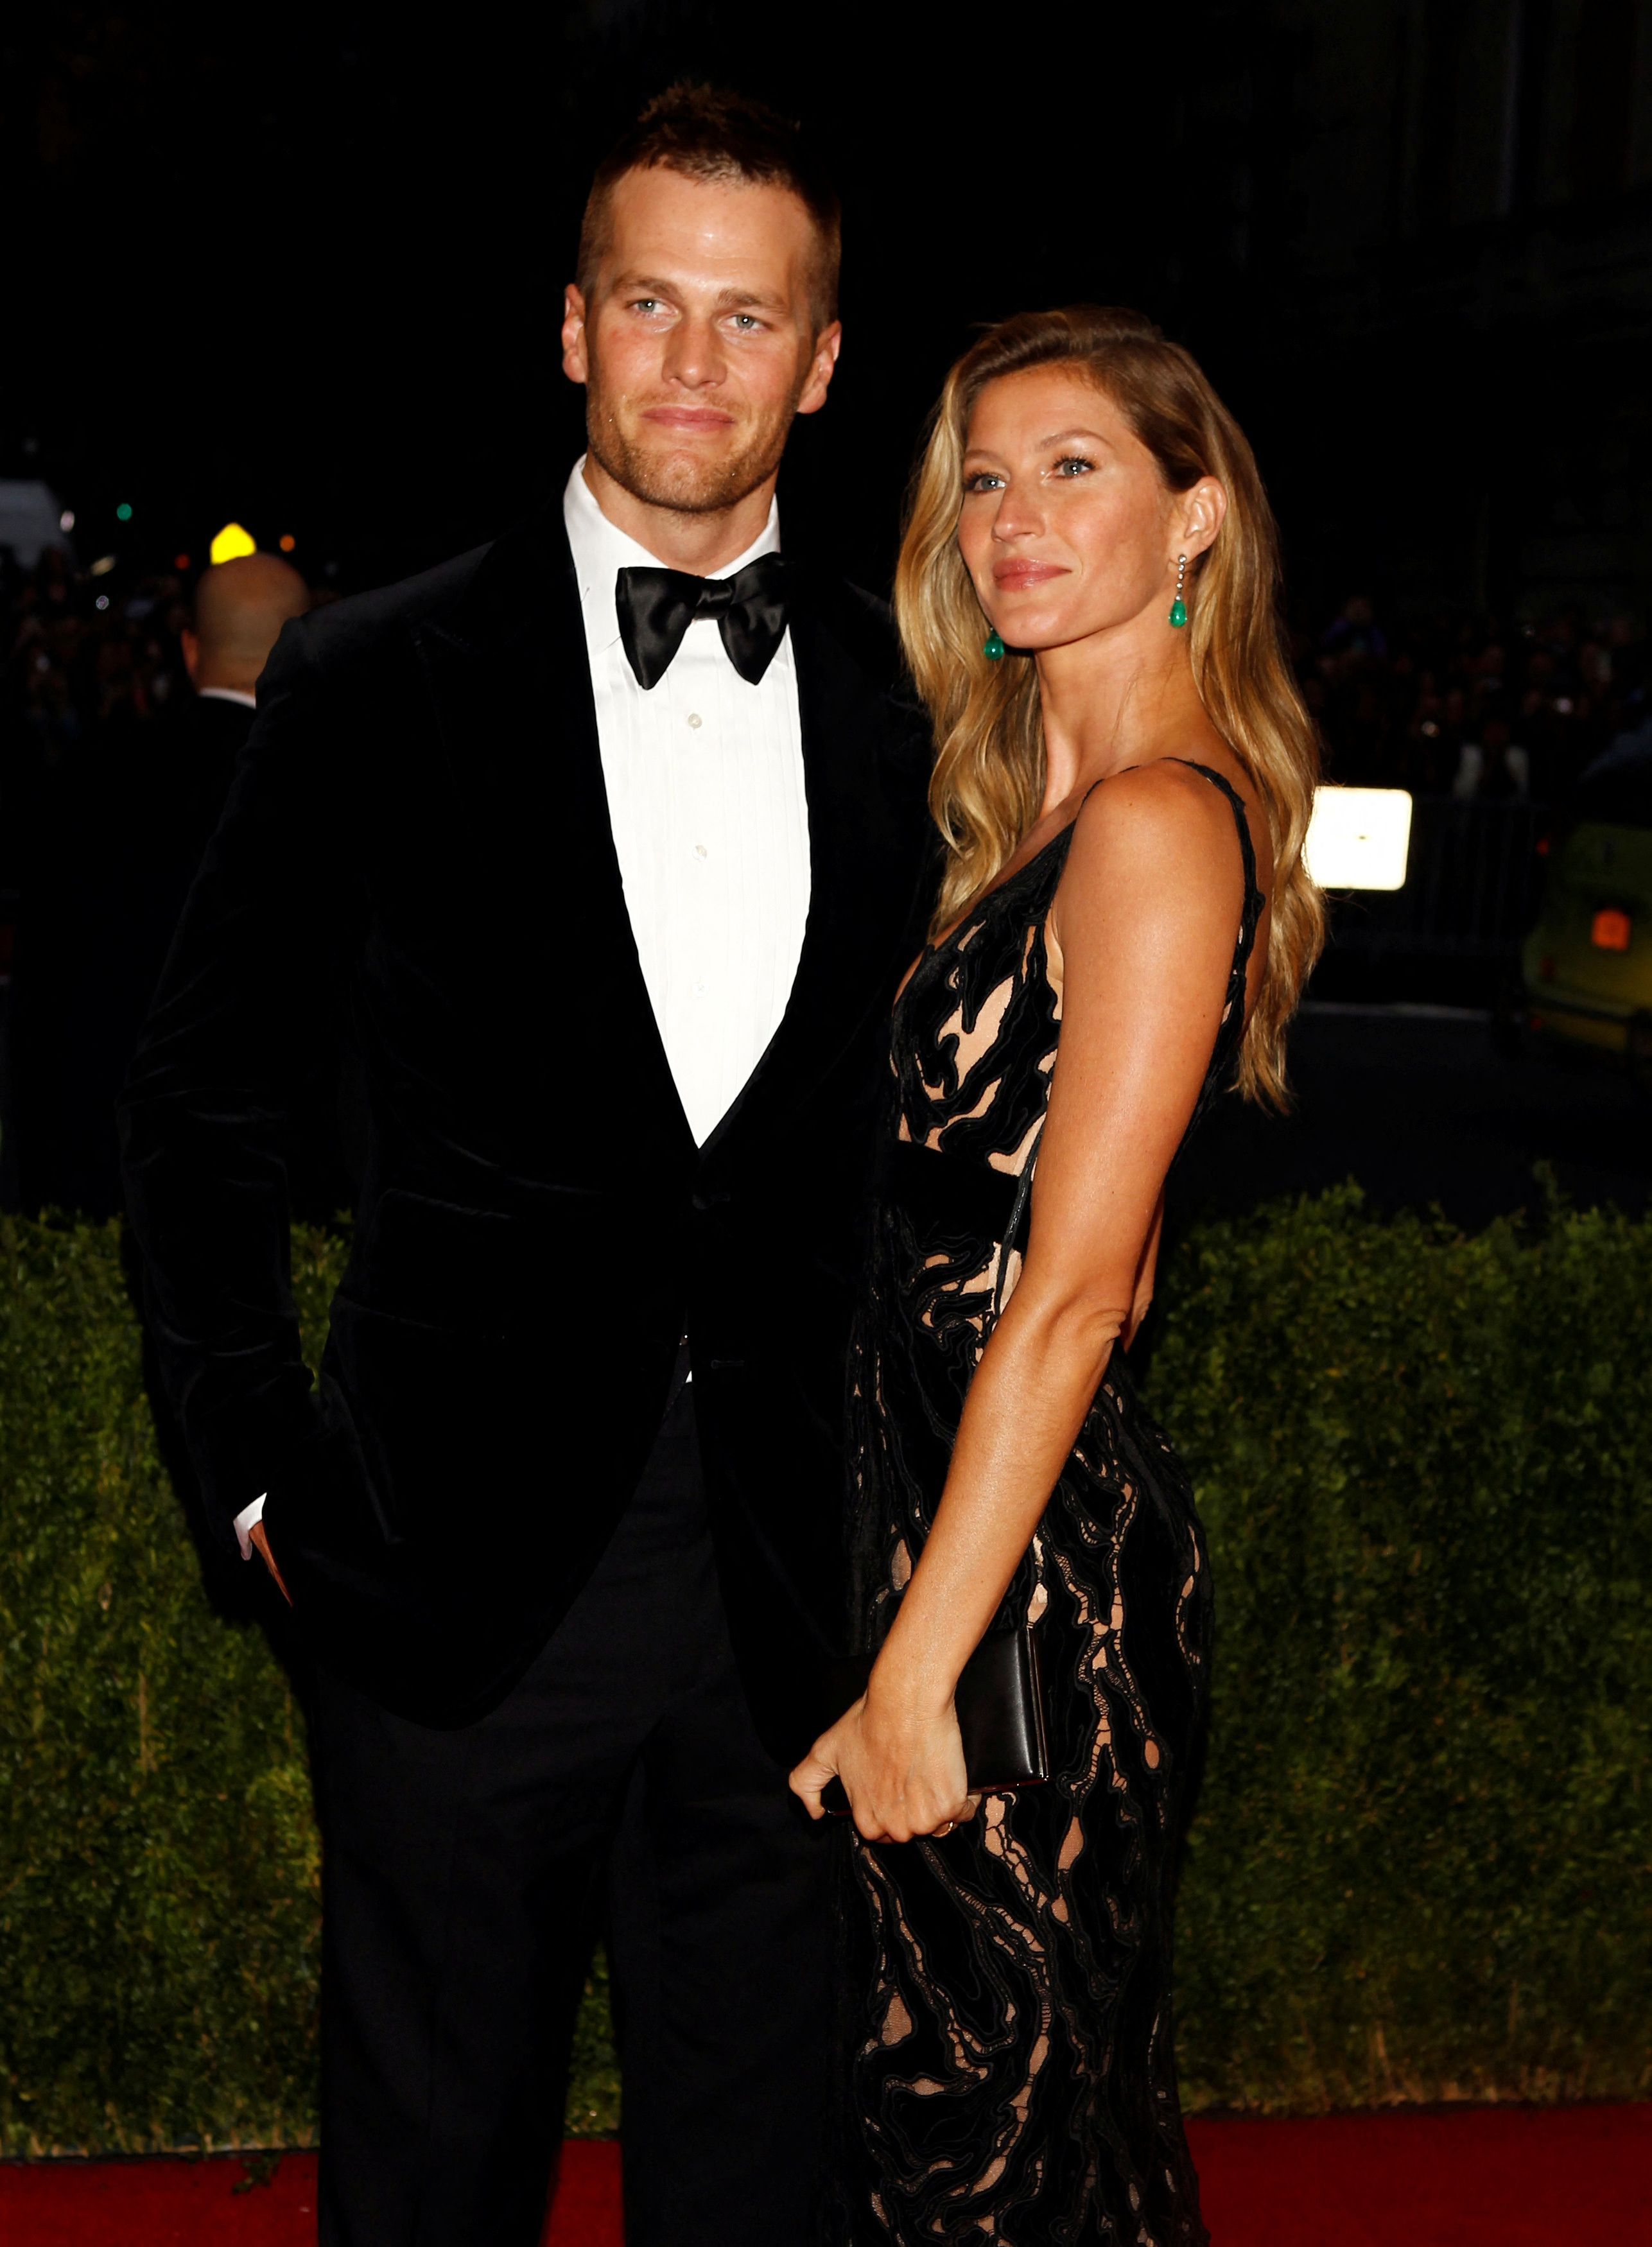 Tom Brady and Gisele Bündchen confirmed their divorce after 13 years of marriage (Reuters)